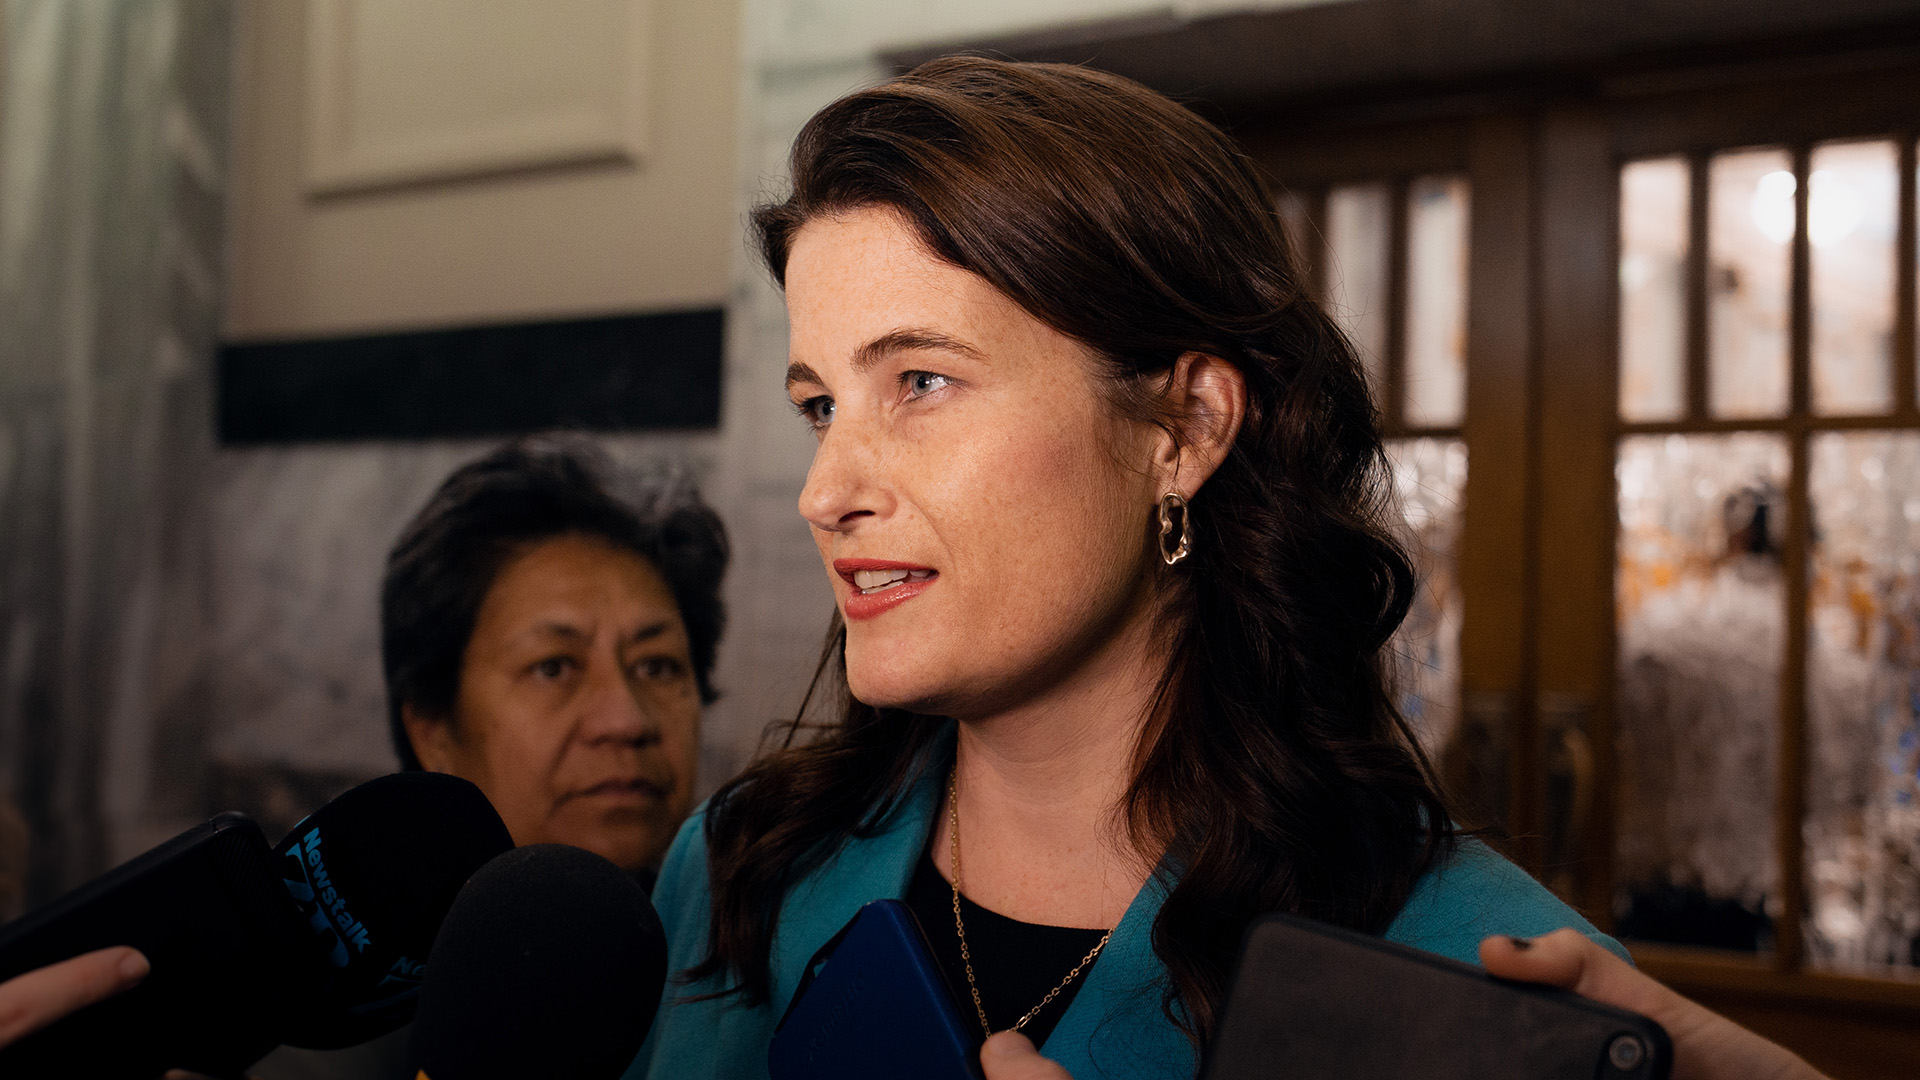 Deputy leader of The National Party, Nicola Willis speaks with media in Parliament